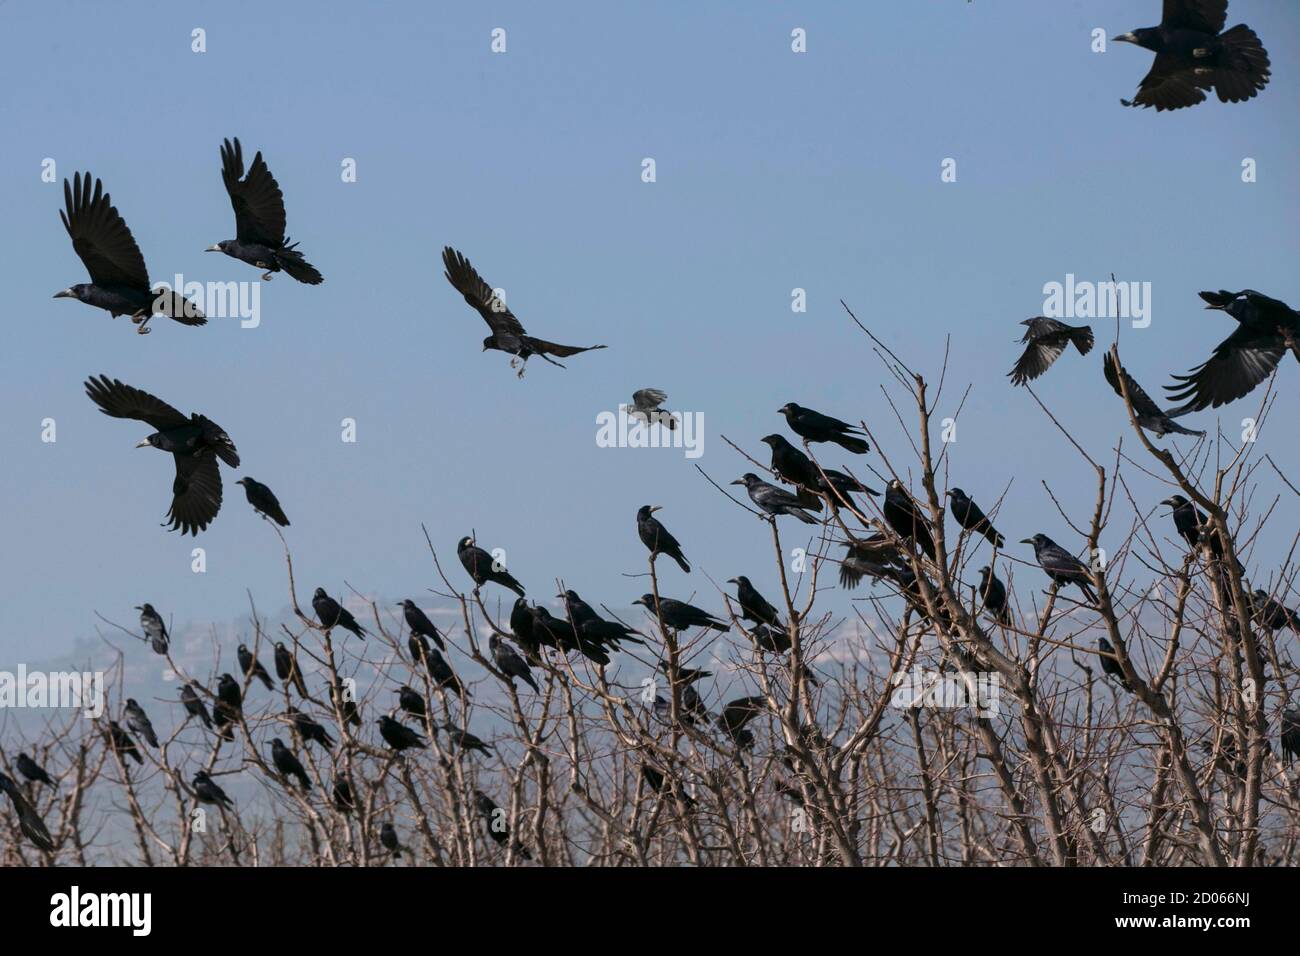 Crows stand on trees near Israel's border with Lebanon January 20, 2015. REUTERS/Baz Ratner (ISRAEL - Tags: ANIMALS ENVIRONMENT) Stock Photo